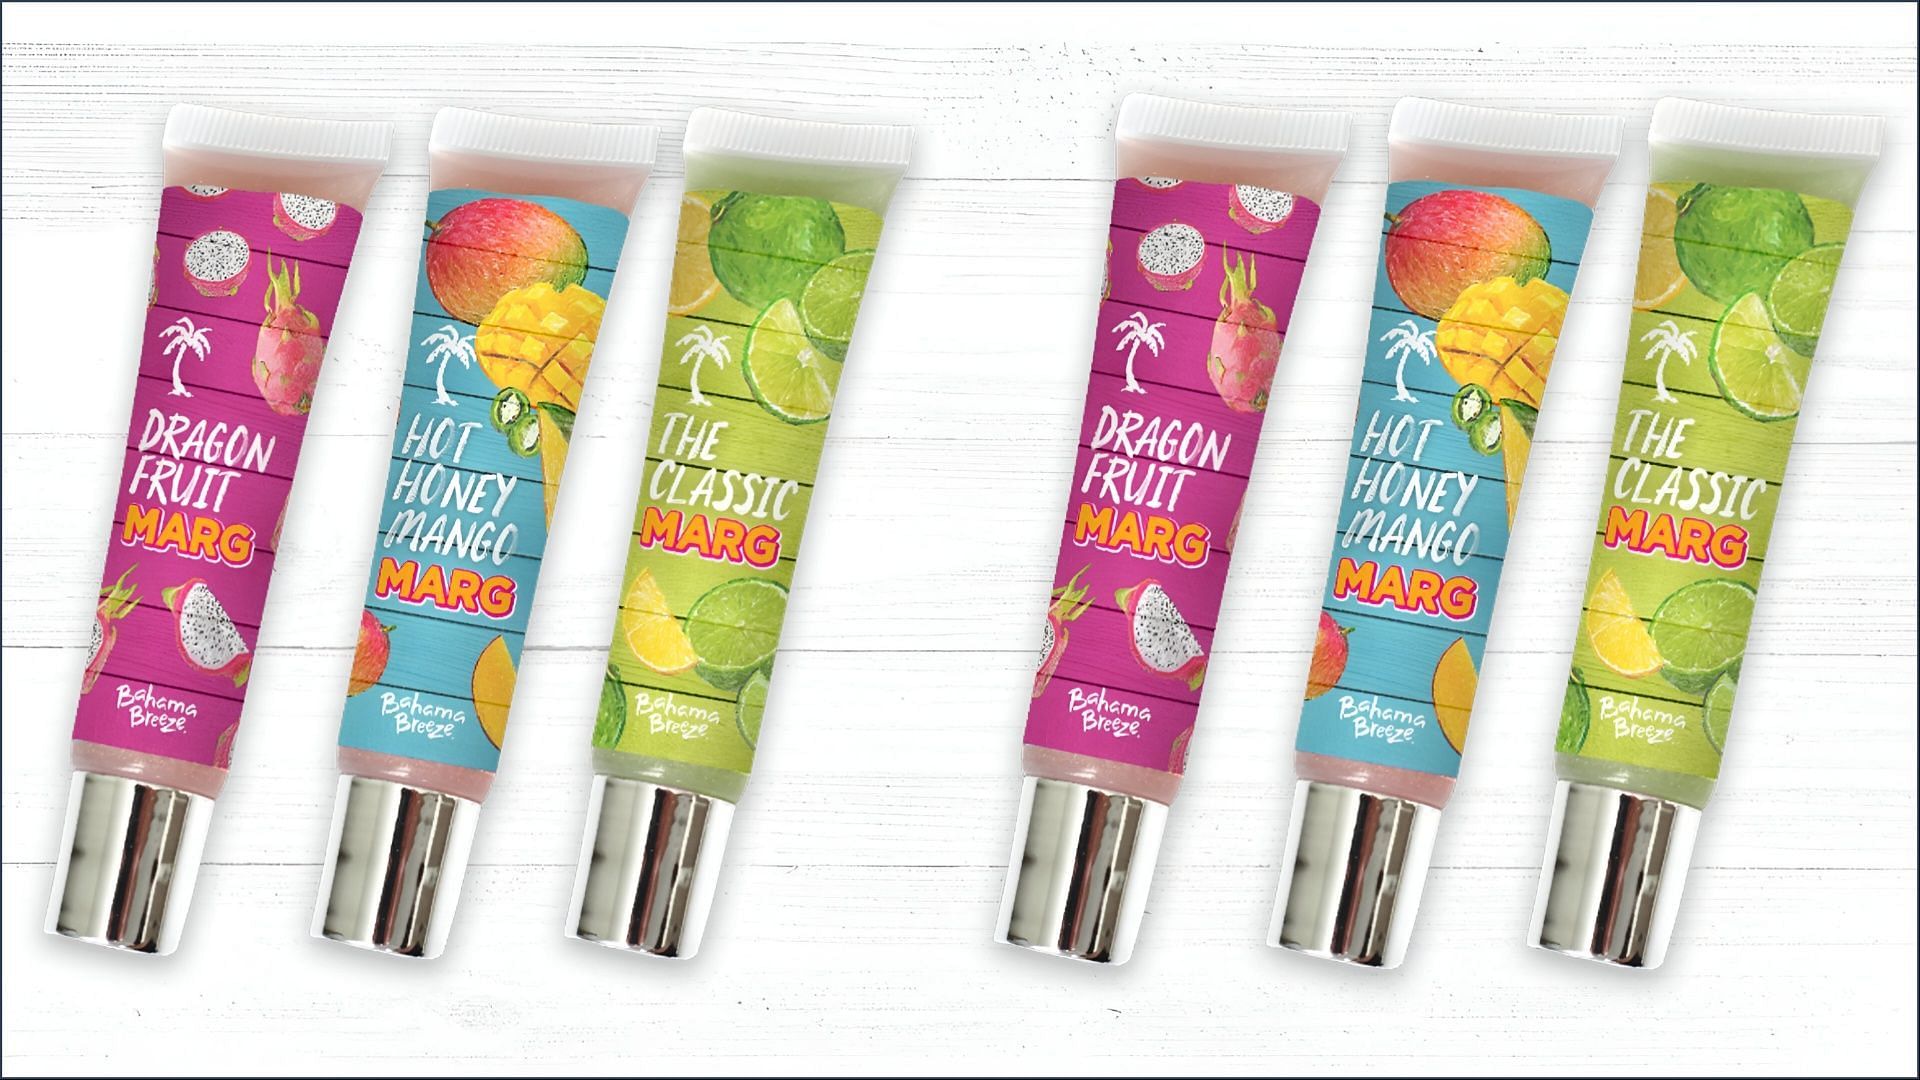 The limited-edition Margarita-flavored lip glosses are priced at $10 each (Image via Bahama Breeze)